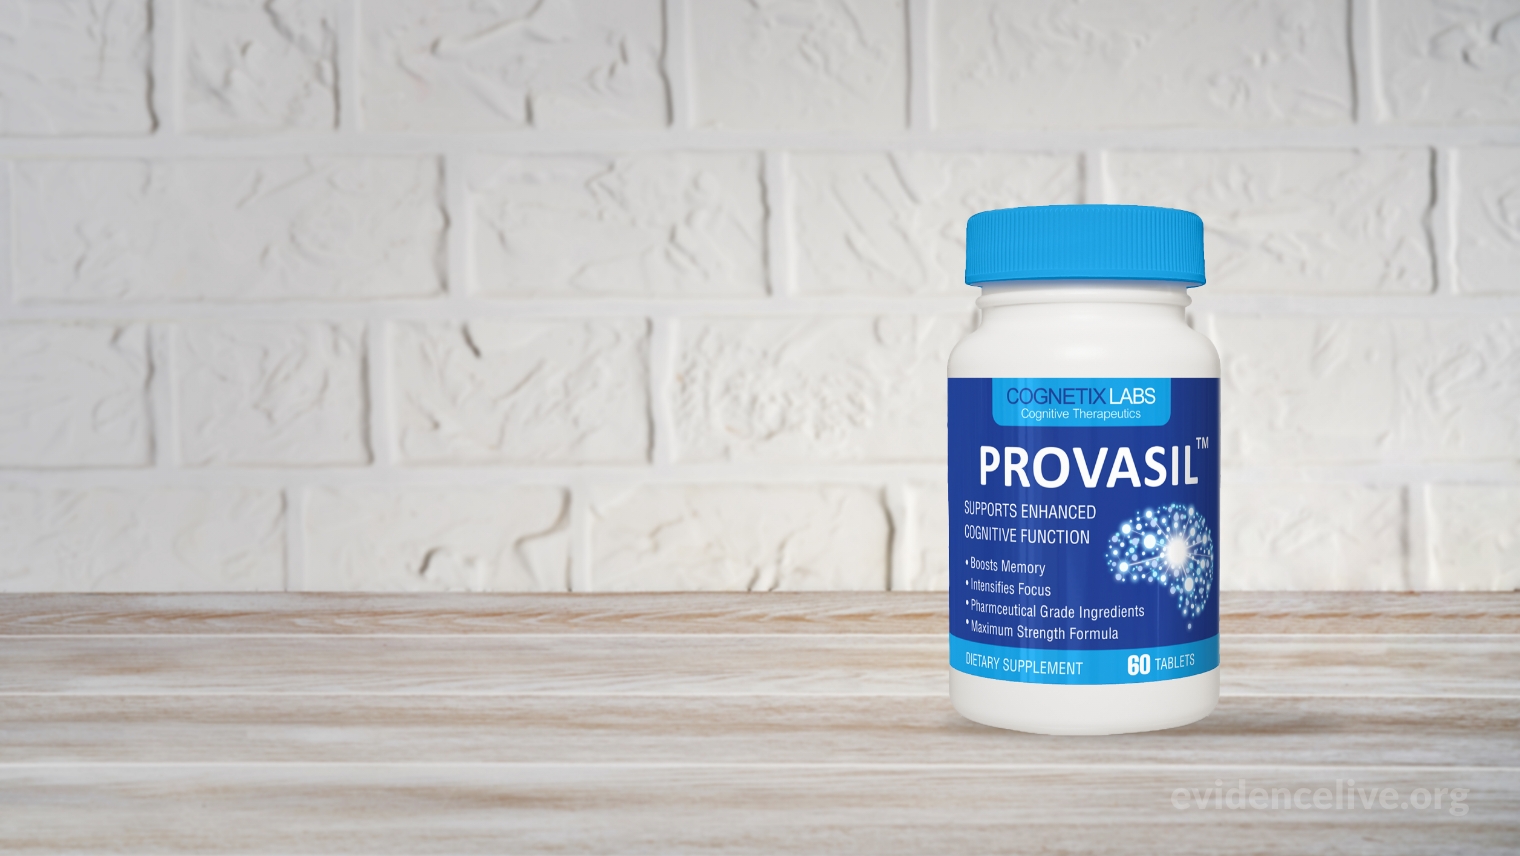 What is Provasil